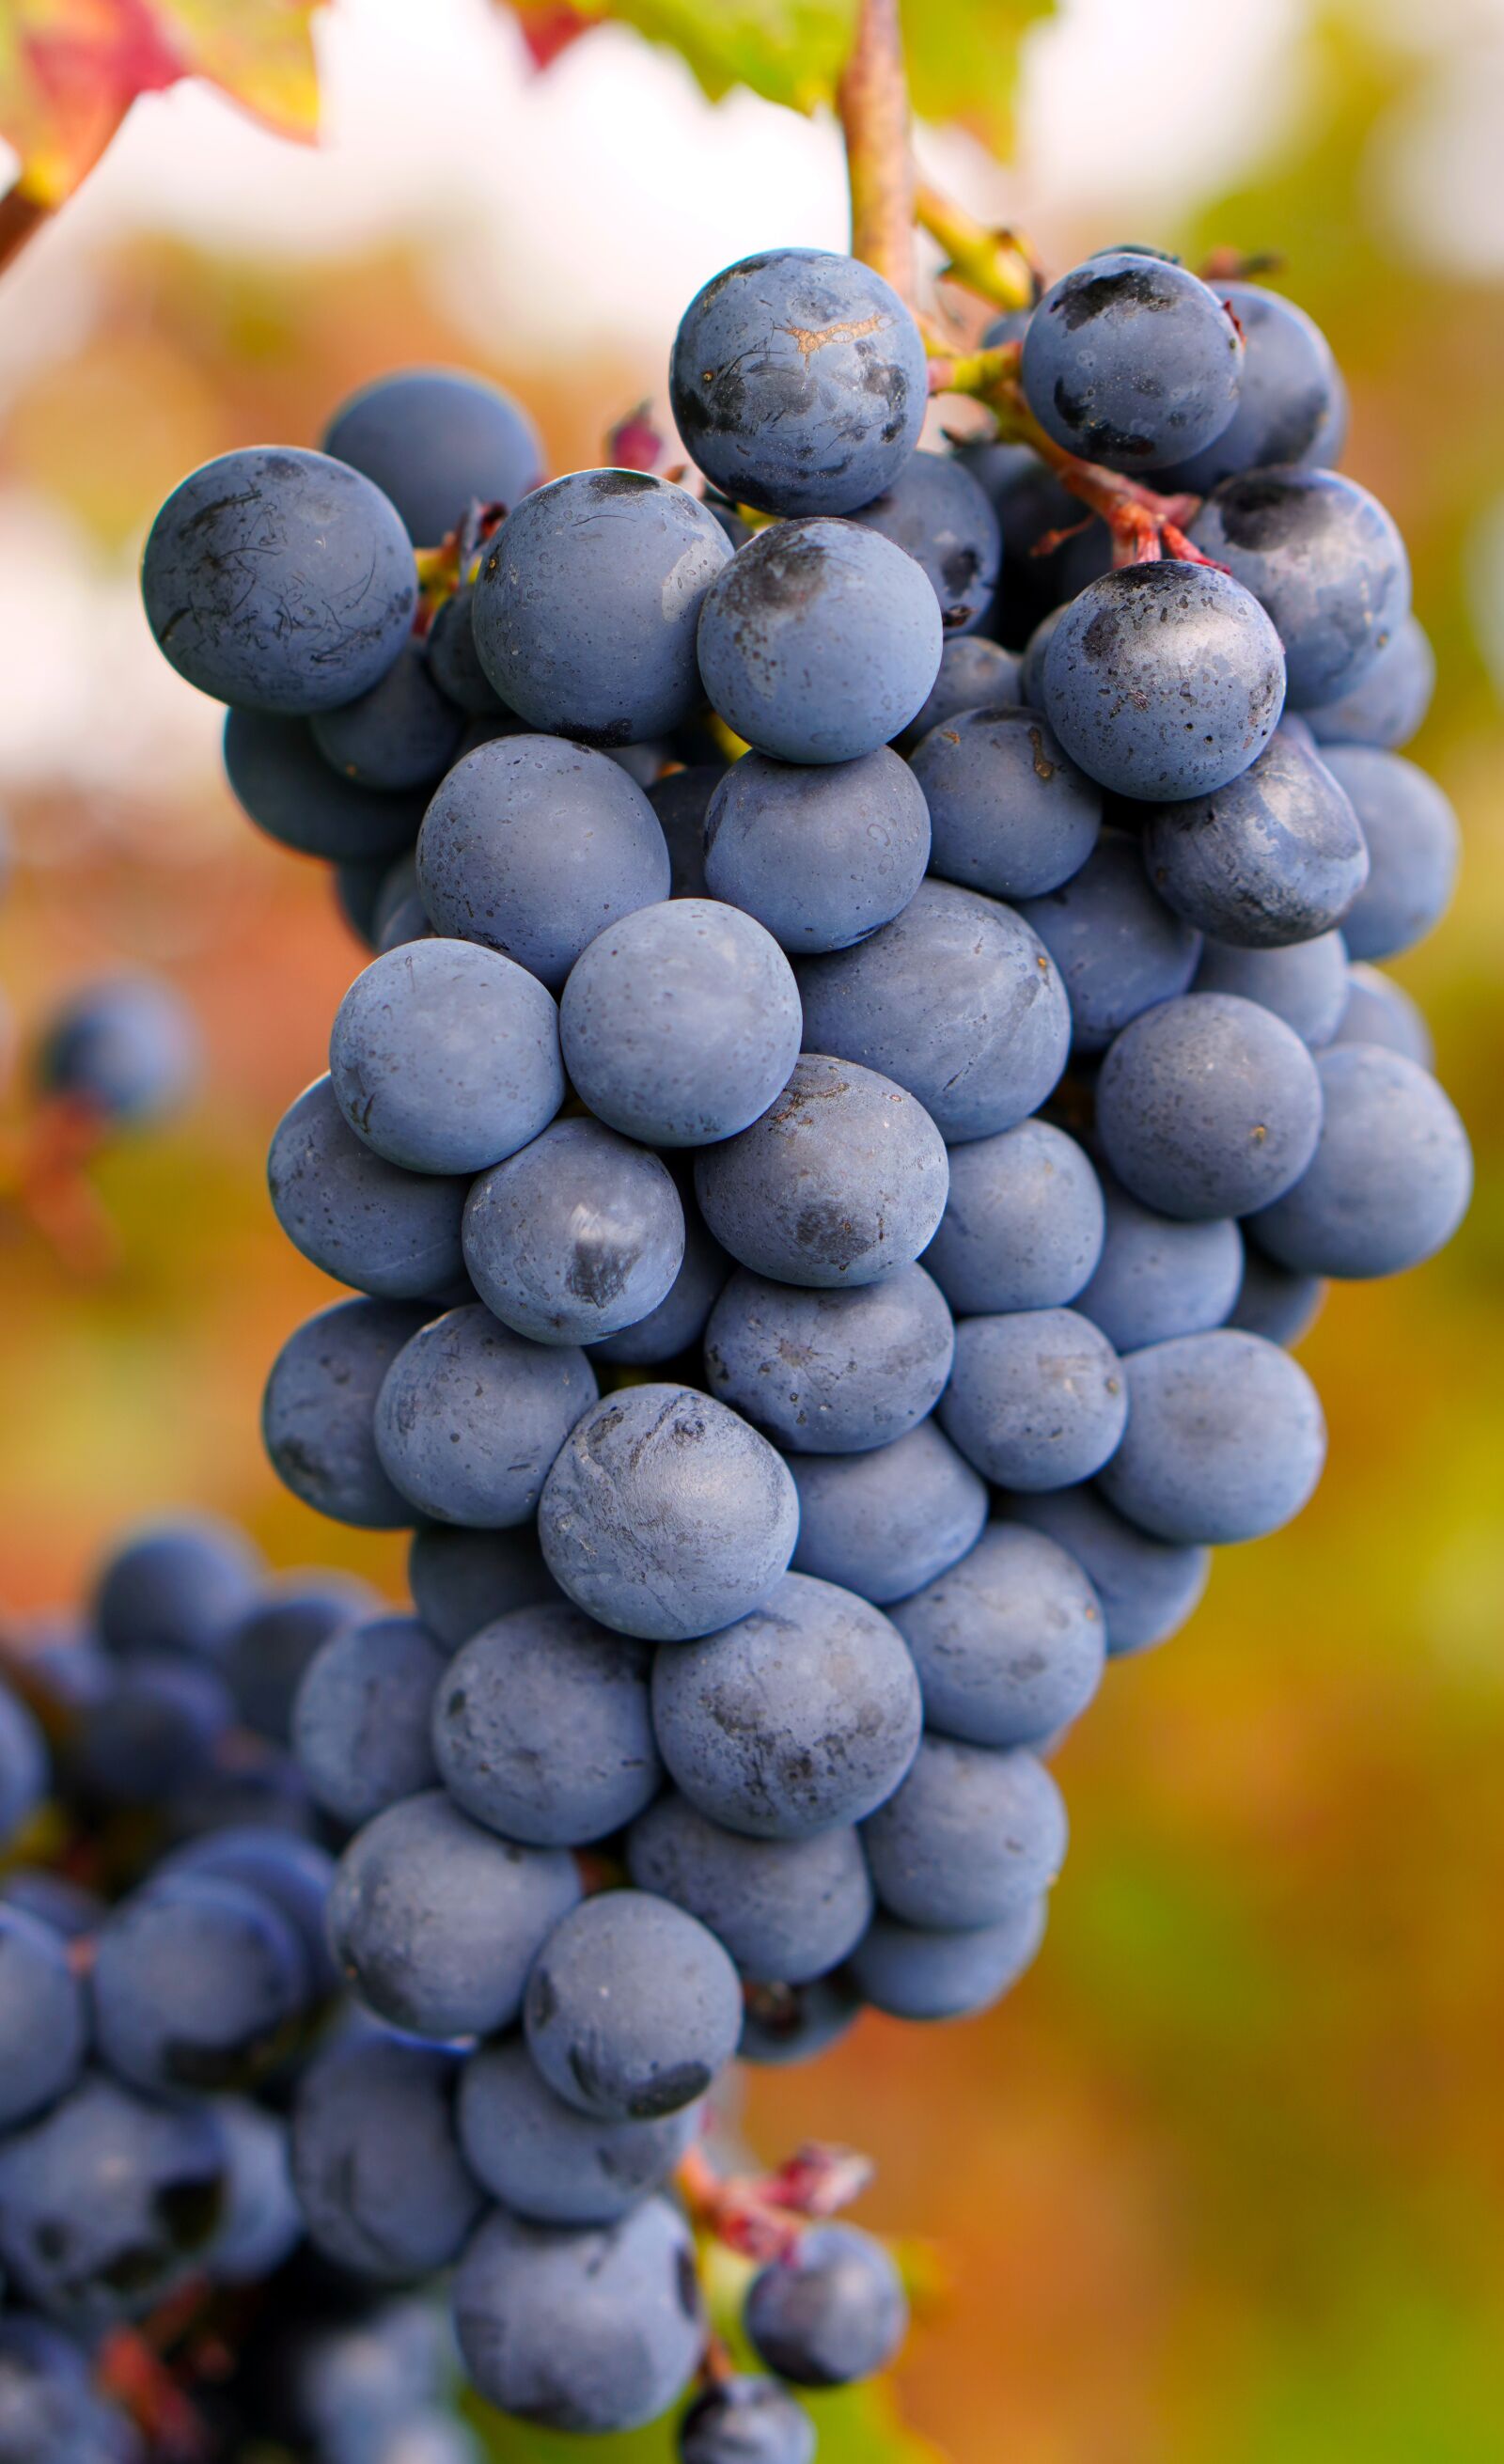 Sony a6400 sample photo. "Grapes, vine, fruit" photography